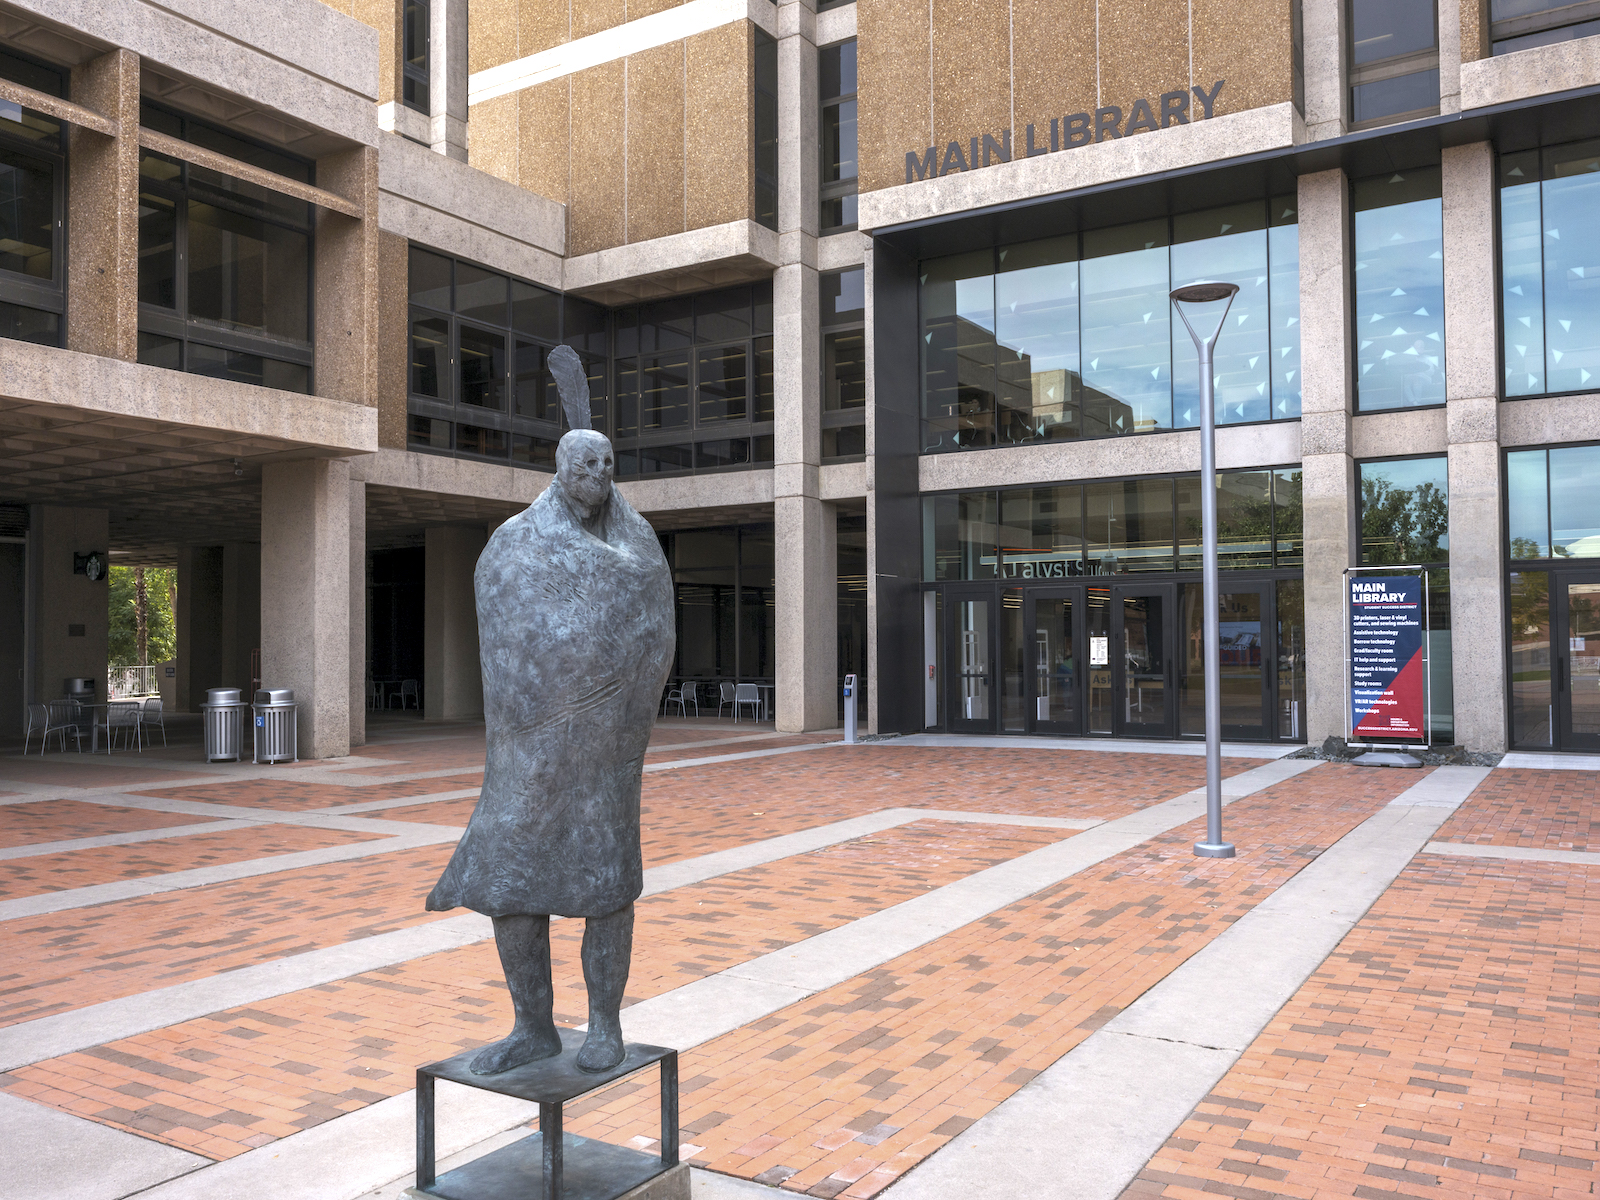 A statue of a person with a blanket and feather stands outside a building labeled main library